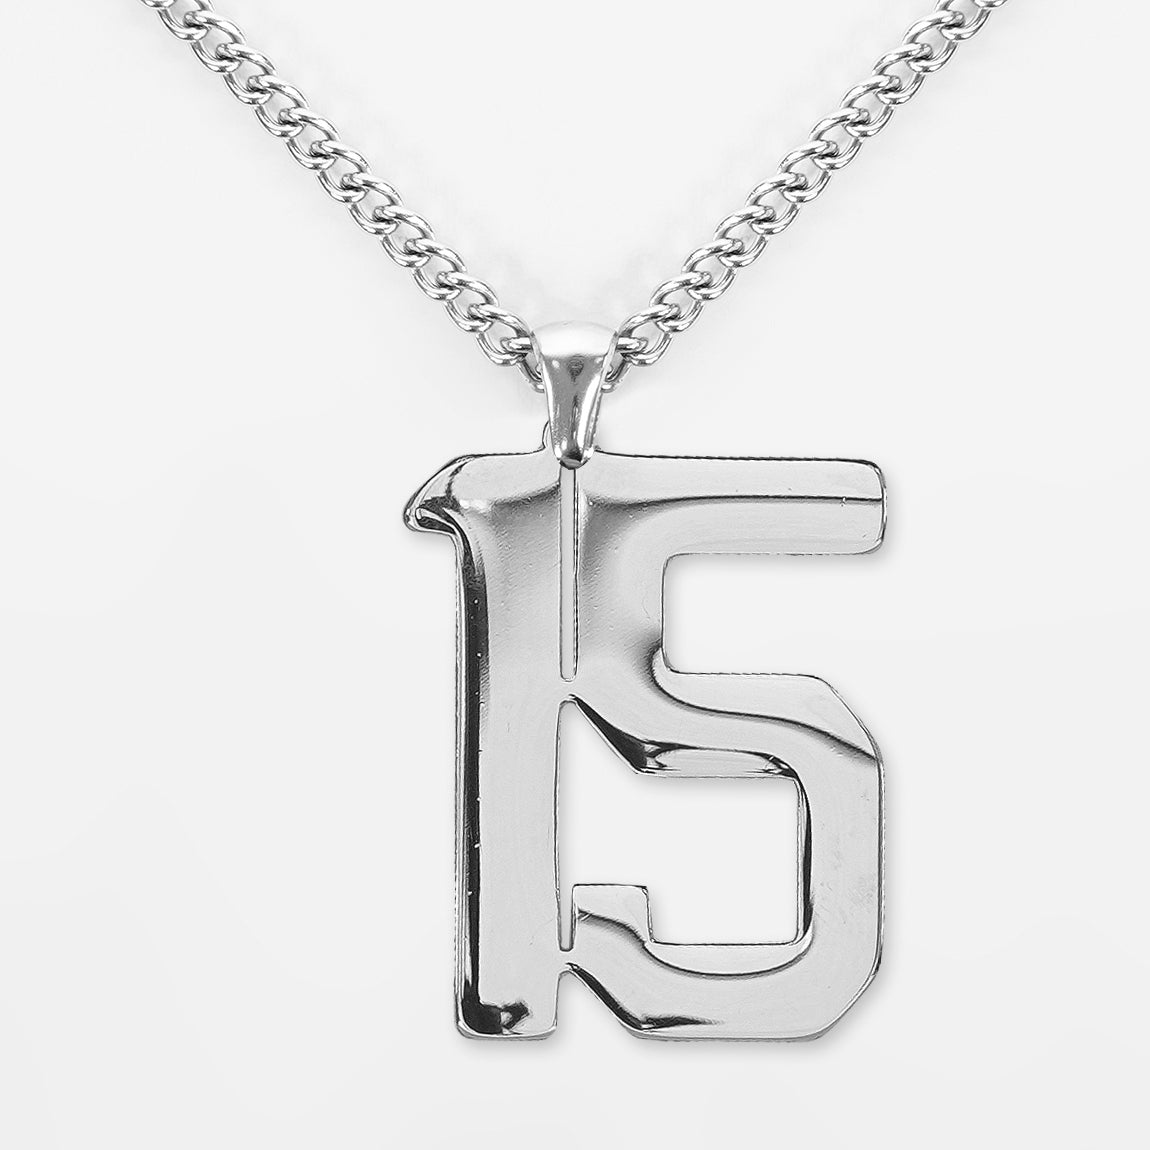 15 Number Pendant with Chain Necklace - Stainless Steel